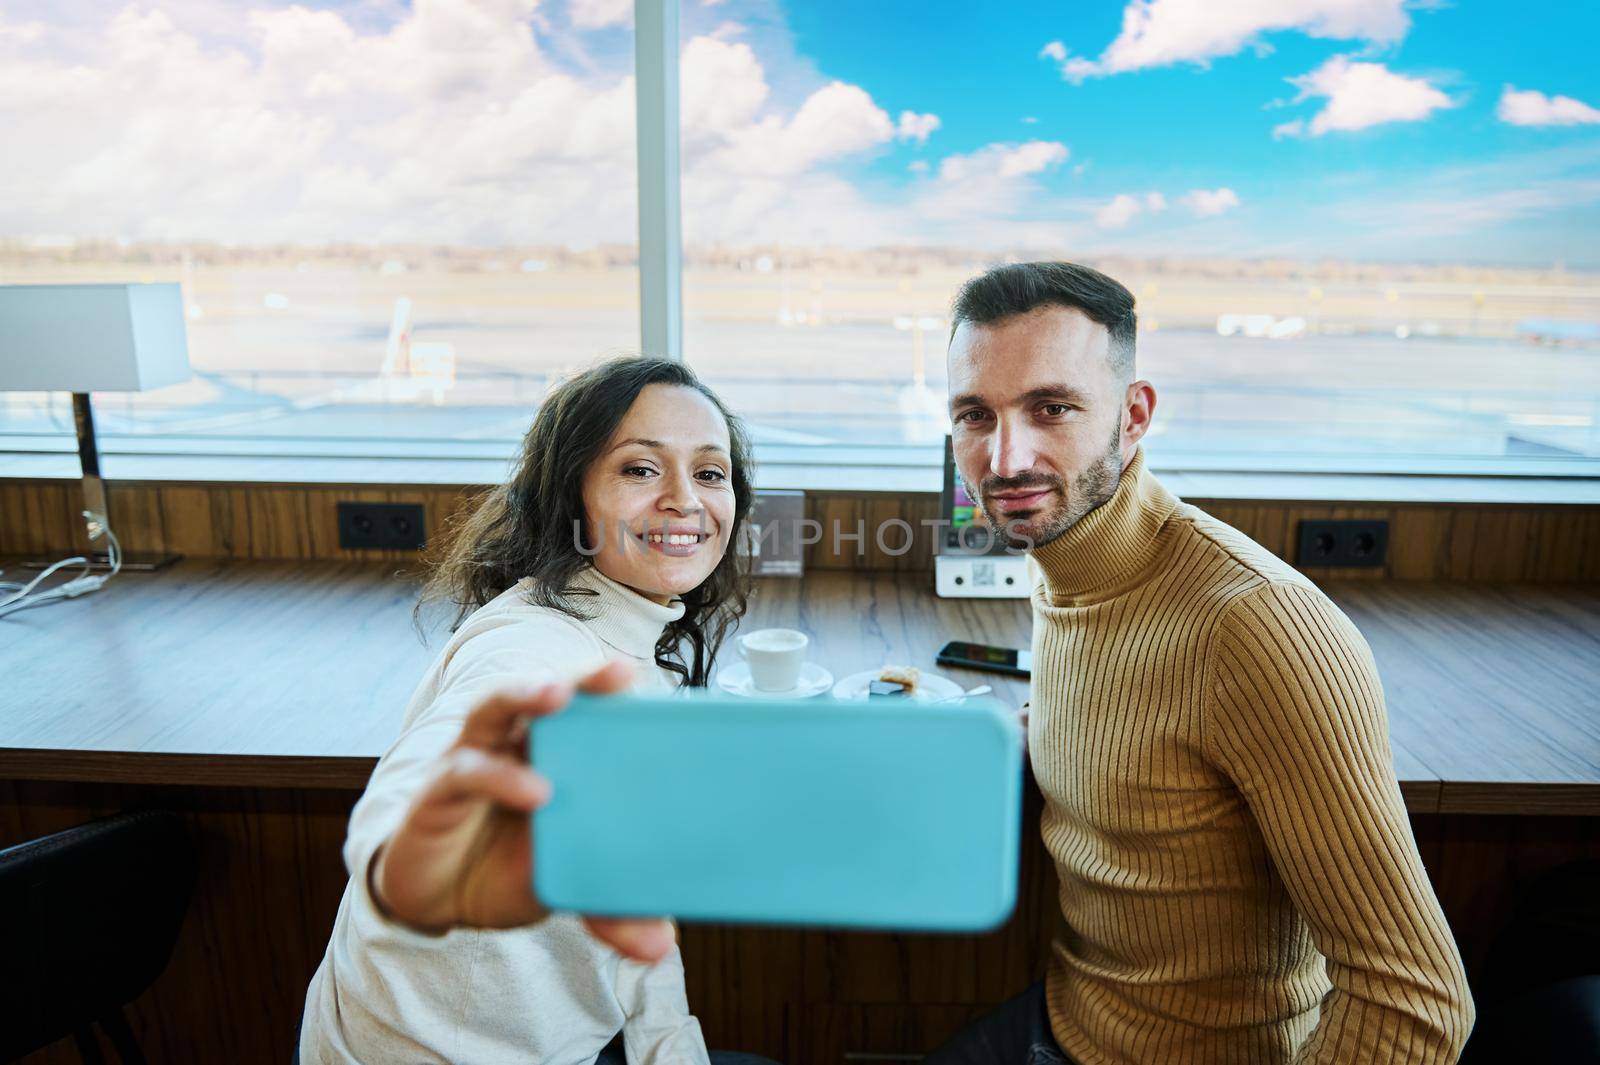 Attractive Middle Eastern young woman sitting next to her husband and taking a selfie against panoramic windows overlooking the runway on a beautiful sunny day while waiting to board a flight